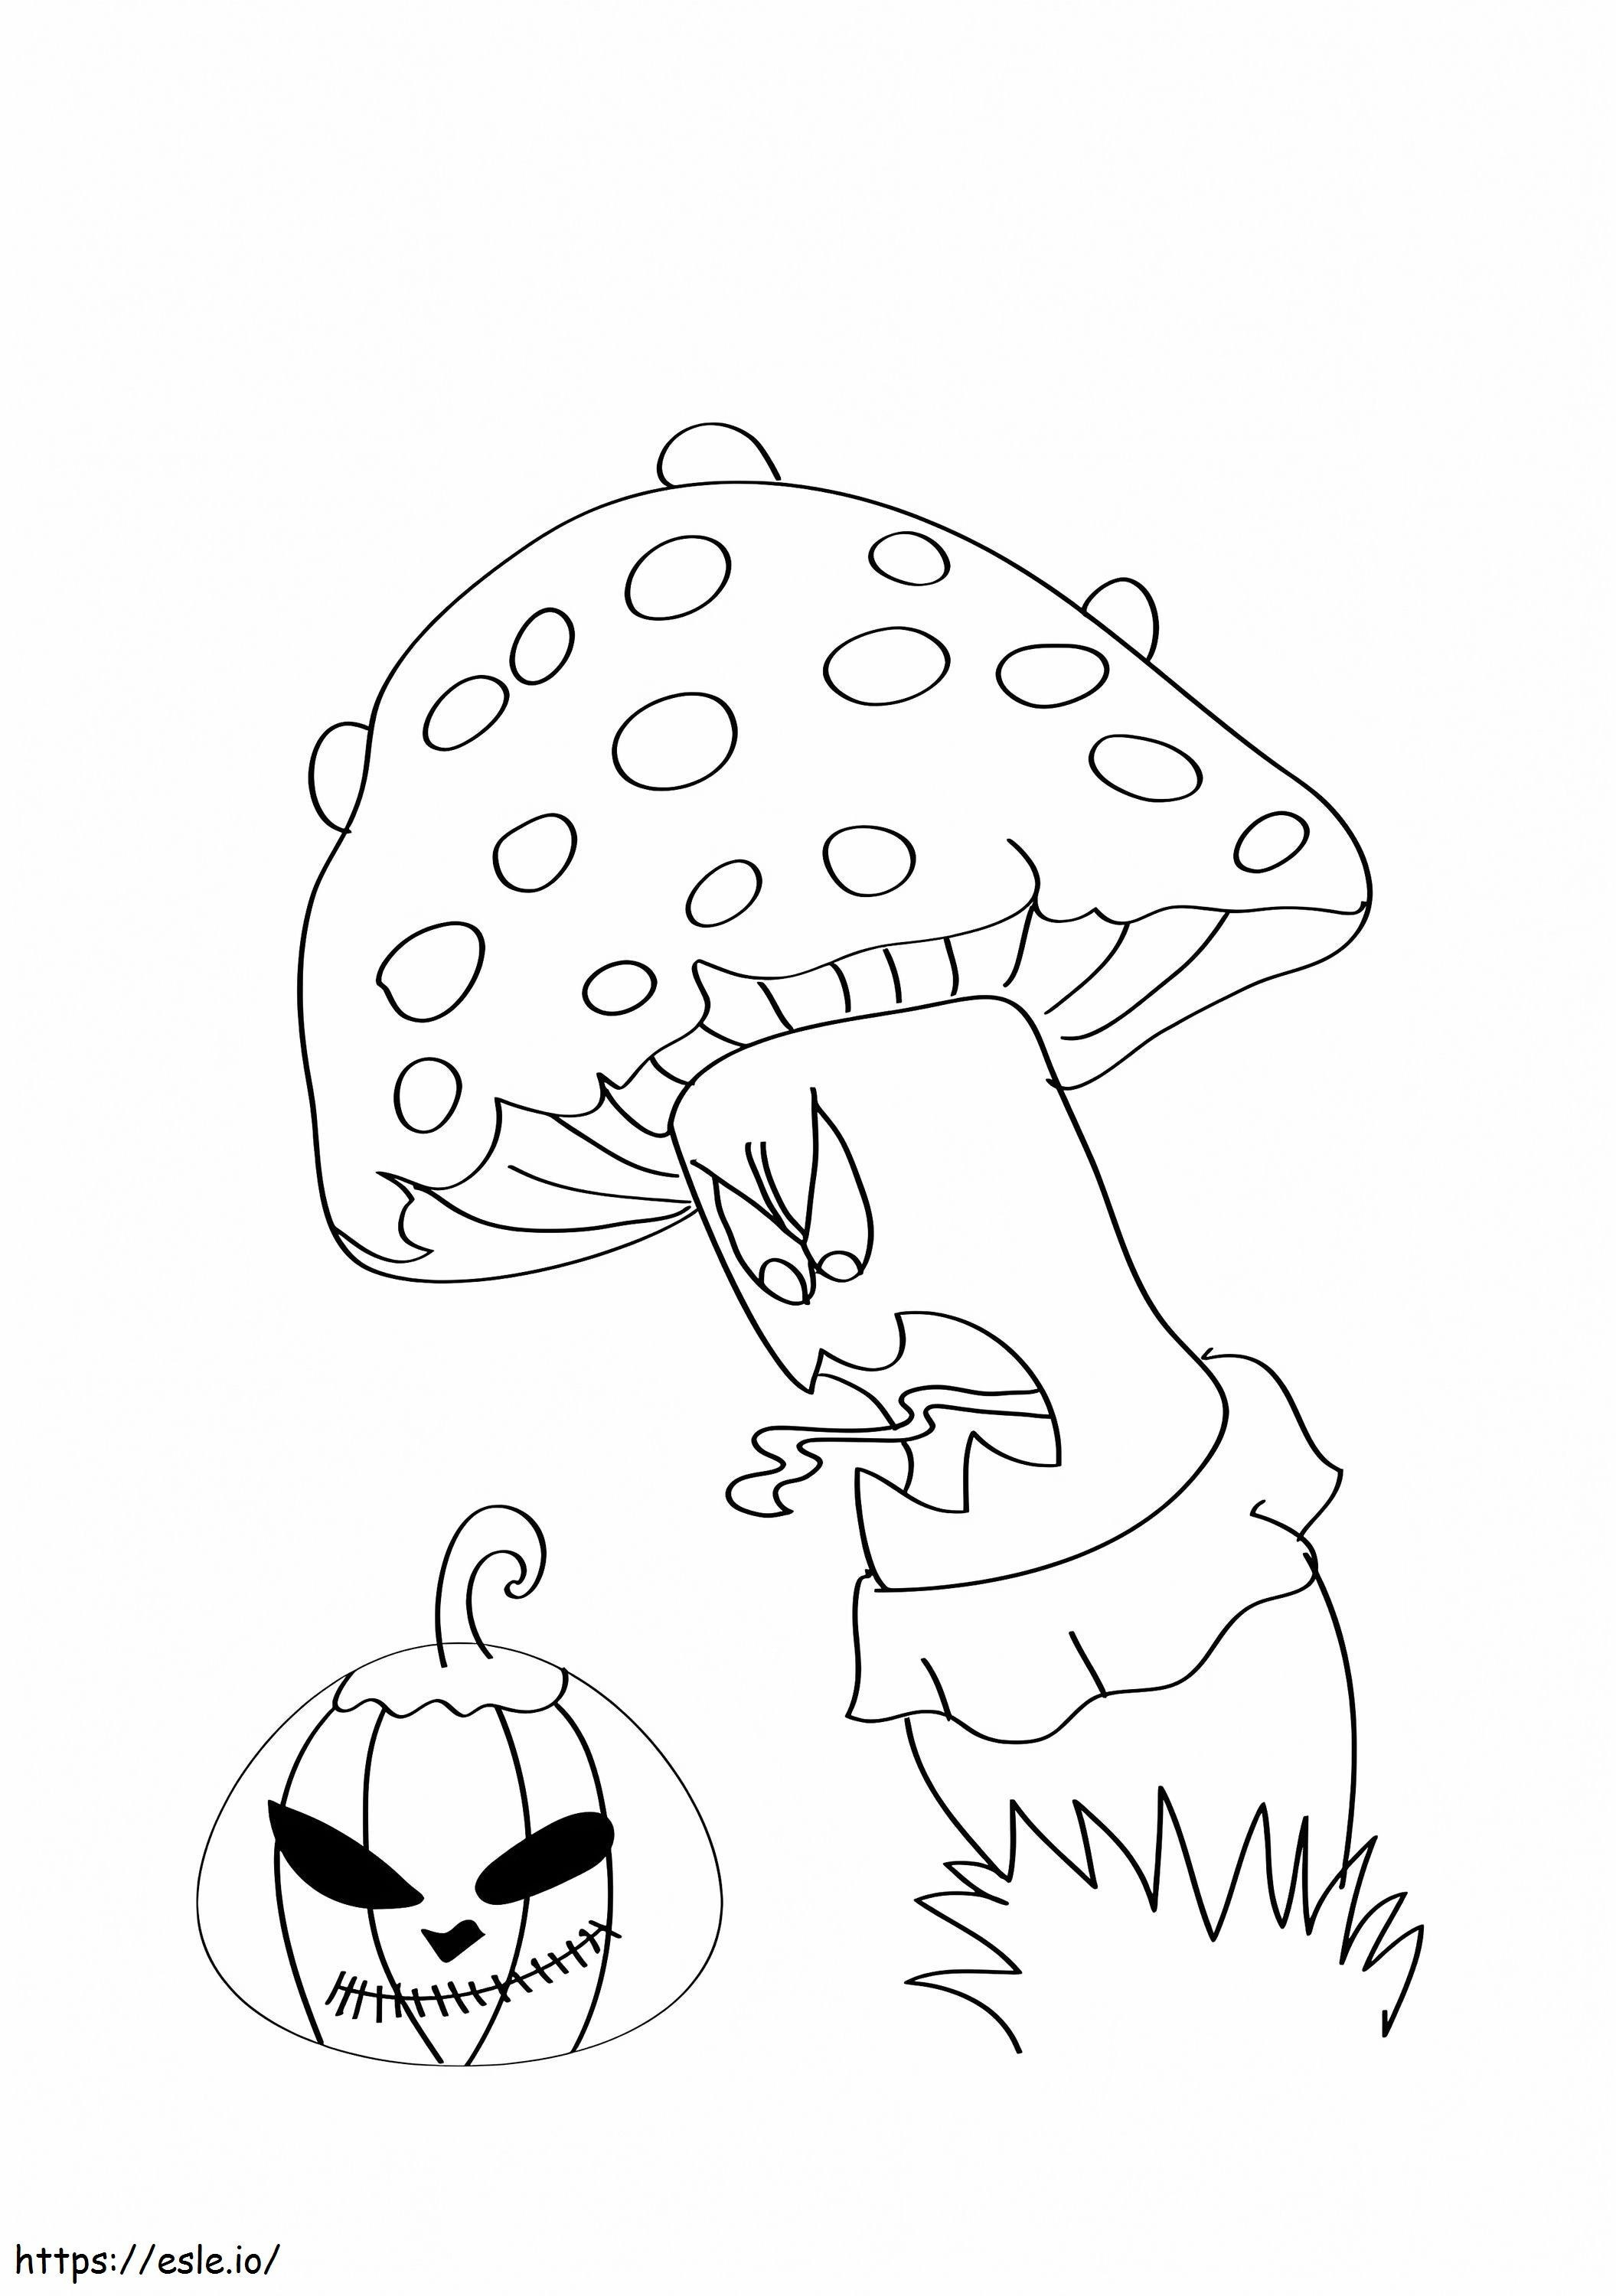 The Fairy Tale Mushrooms 16 A4 coloring page